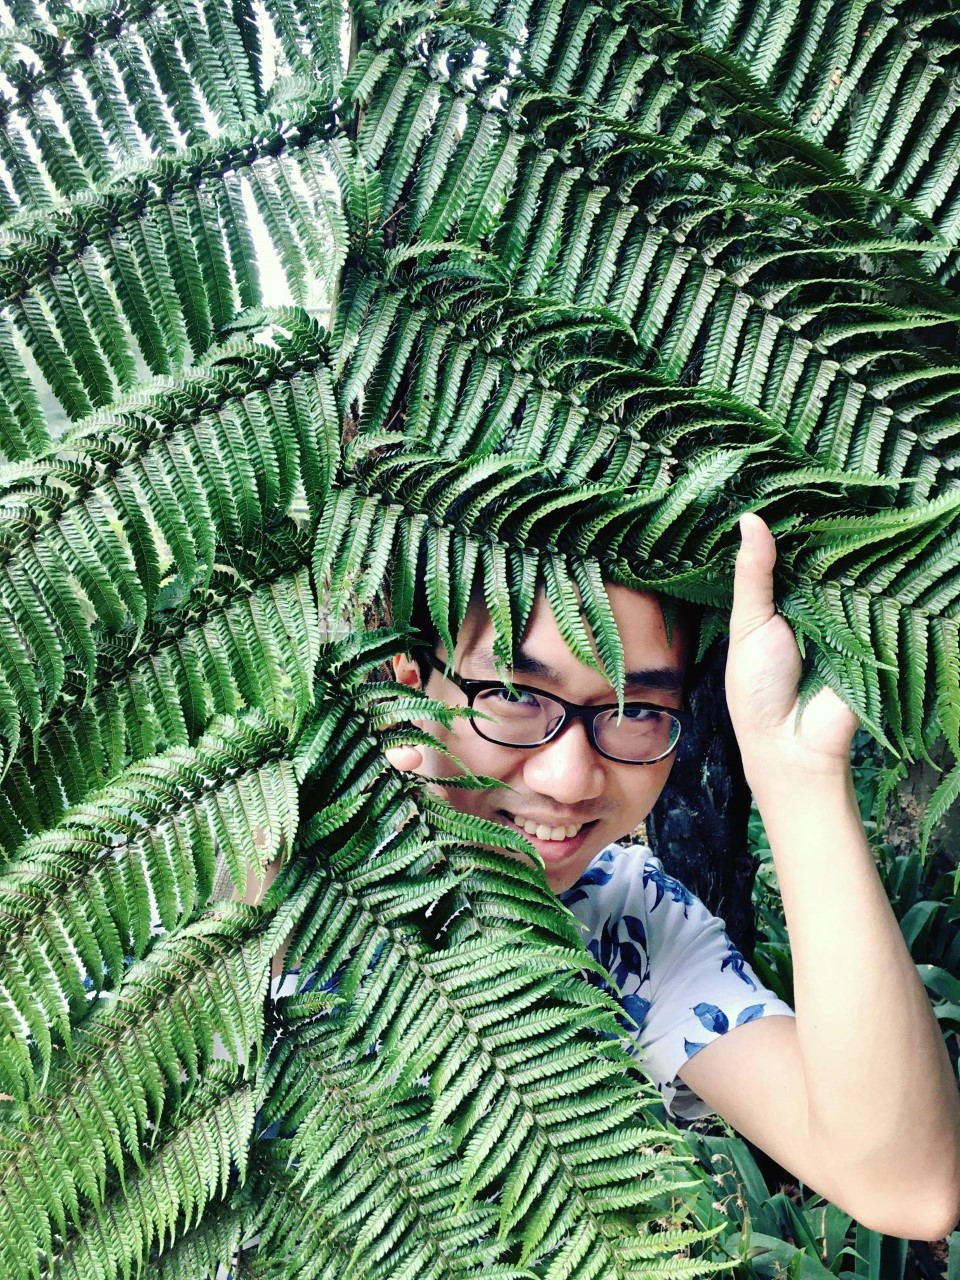 A student posing with a fern 